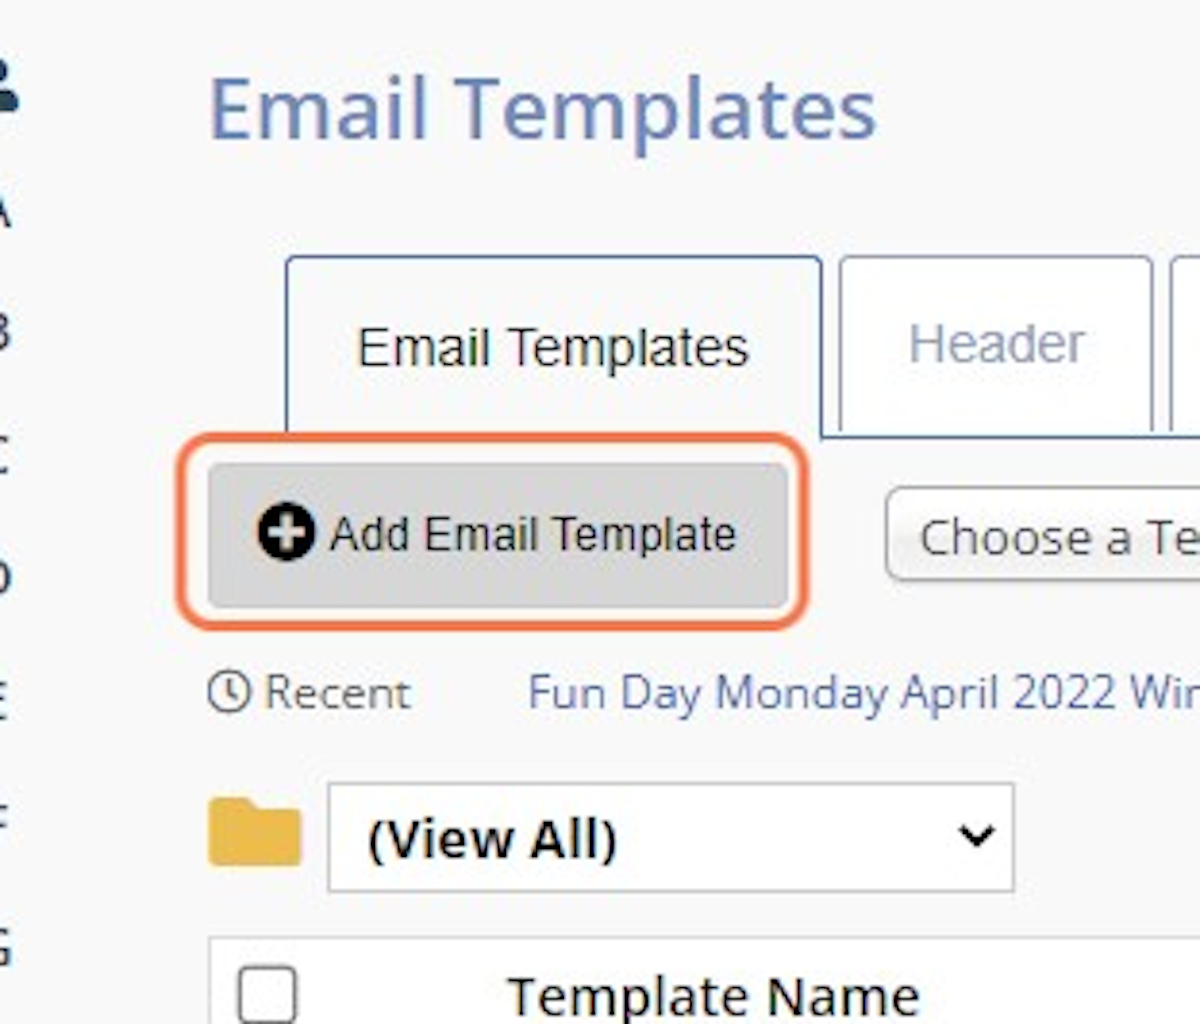 Add Email Template takes you to our catalogue where you can view snippets of each template